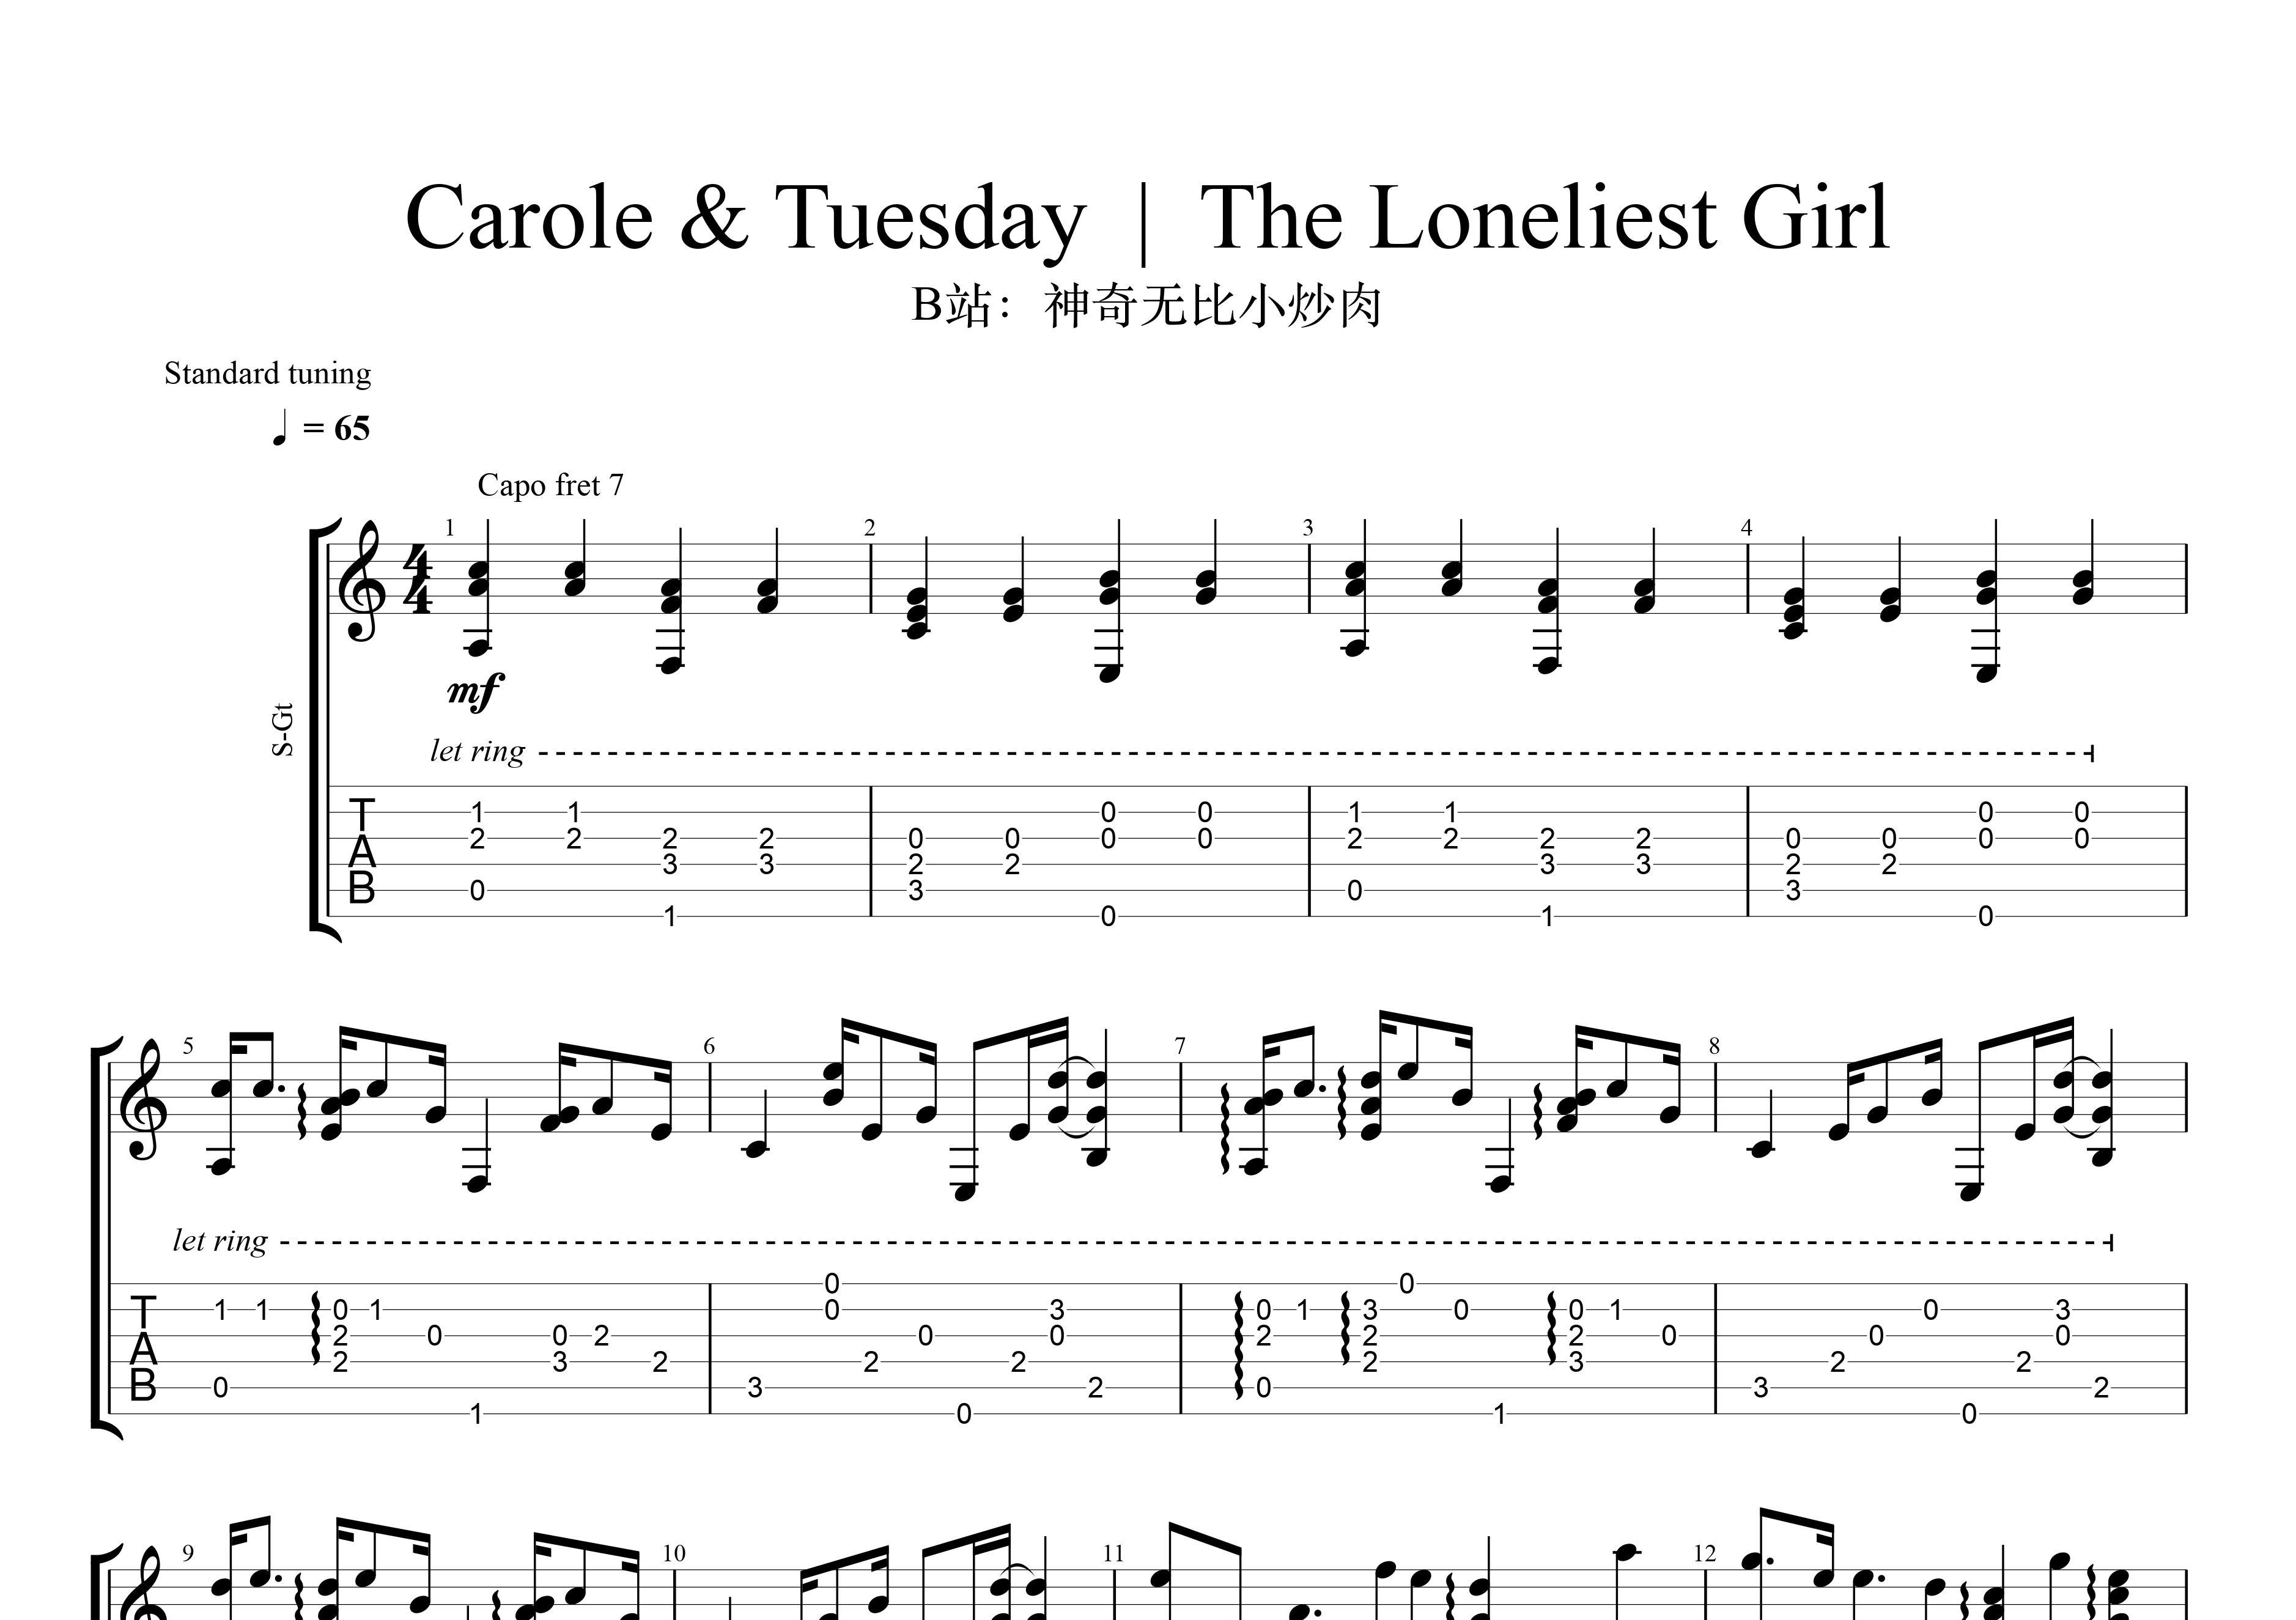 the loneliest girl吉他谱_carole & tuesday插曲_指弹独奏谱